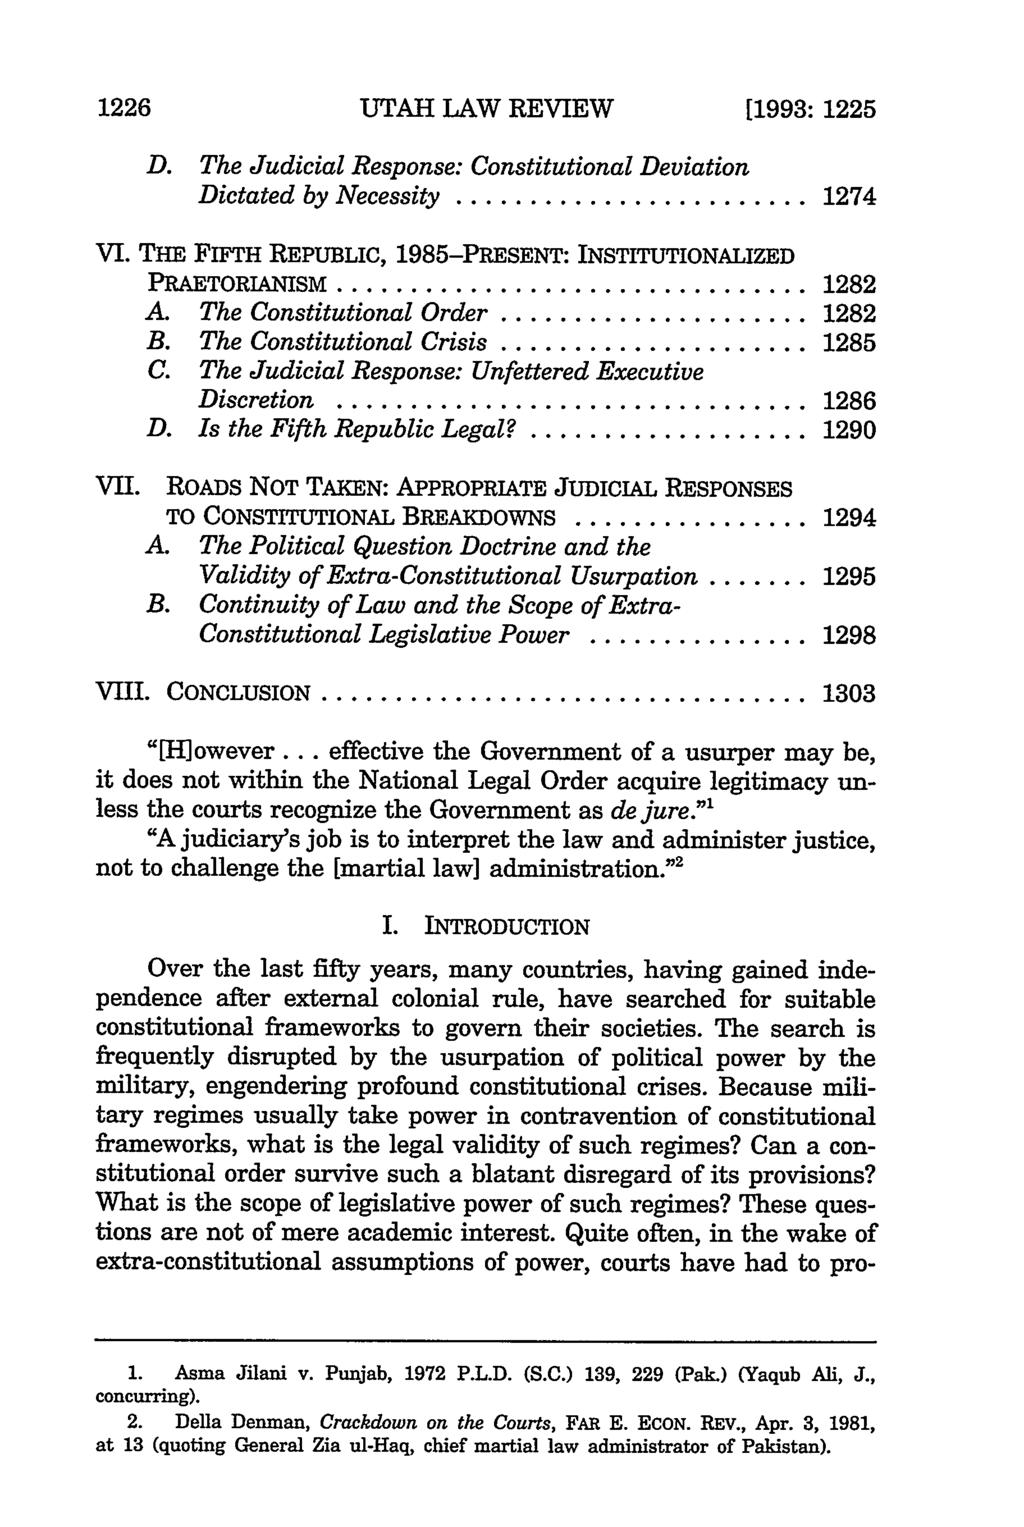 1226 UTAH LAW REVIEW [1993: 1225 D. The Judicial Response: Constitutional Deviation Dictated by Necessity... 1274 VI. THE FIFTH REPUBLIC, 1985-PRESENT: INSTITUTIONALIZED PRAETORIANISM.